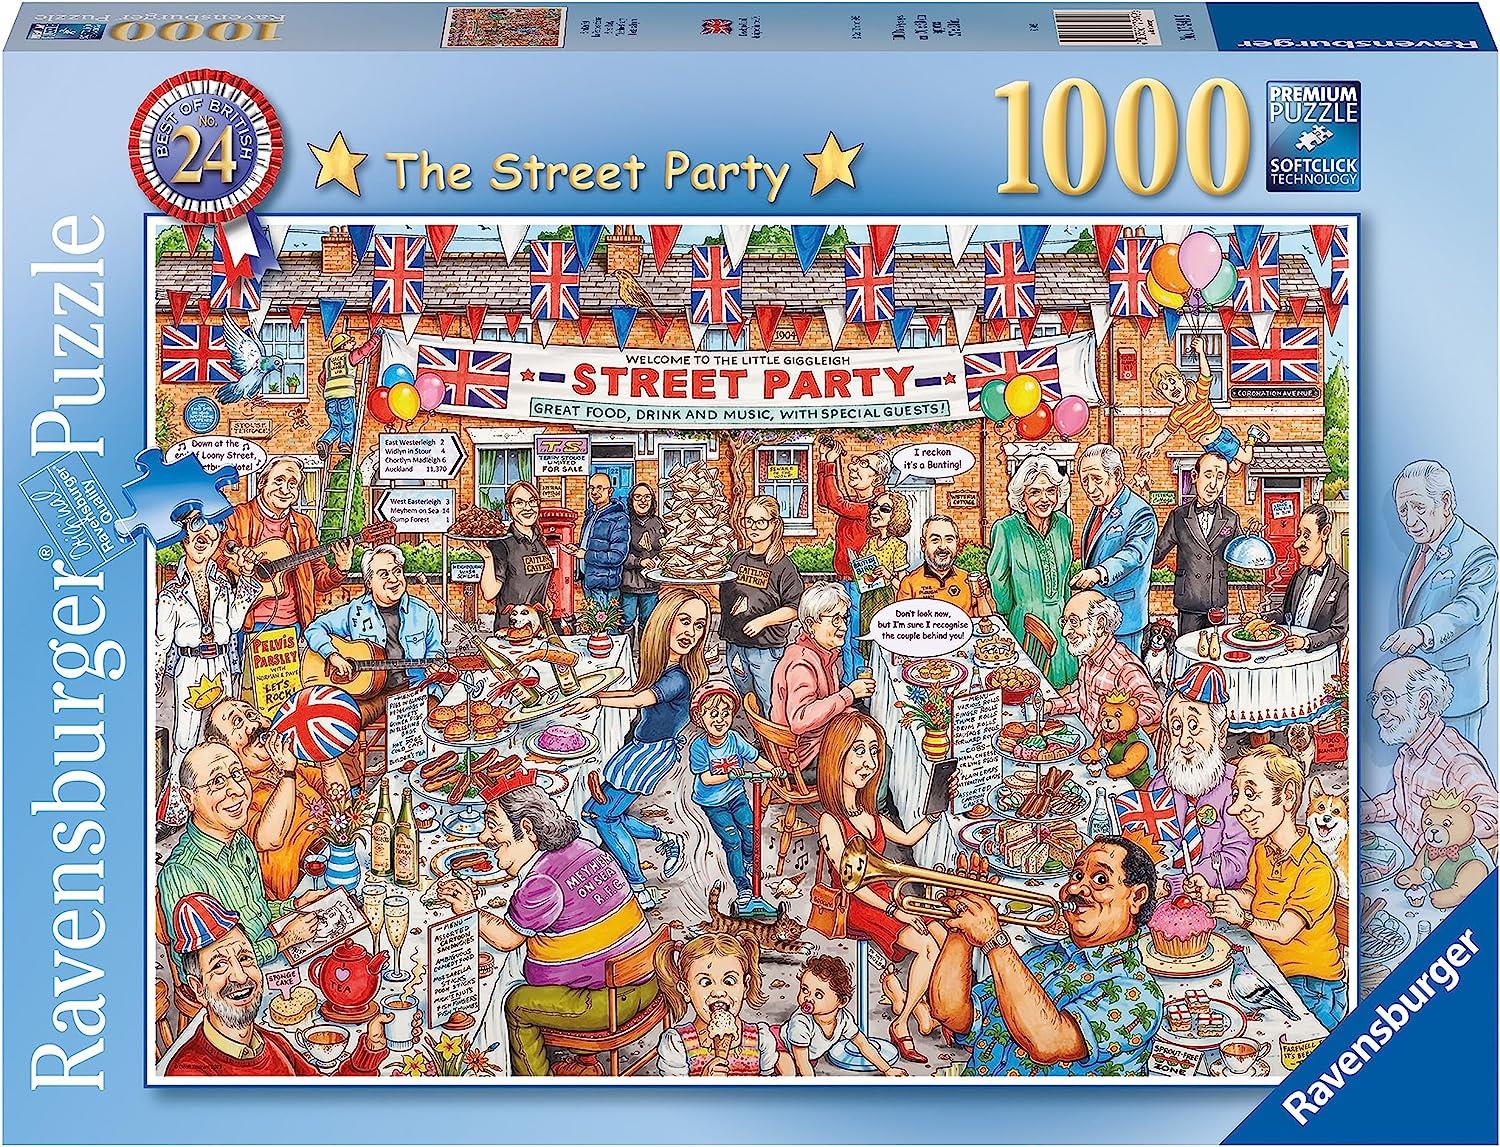 Ravensburger Best of British - The Street Party Jigsaw Puzzle (1000 Pieces)